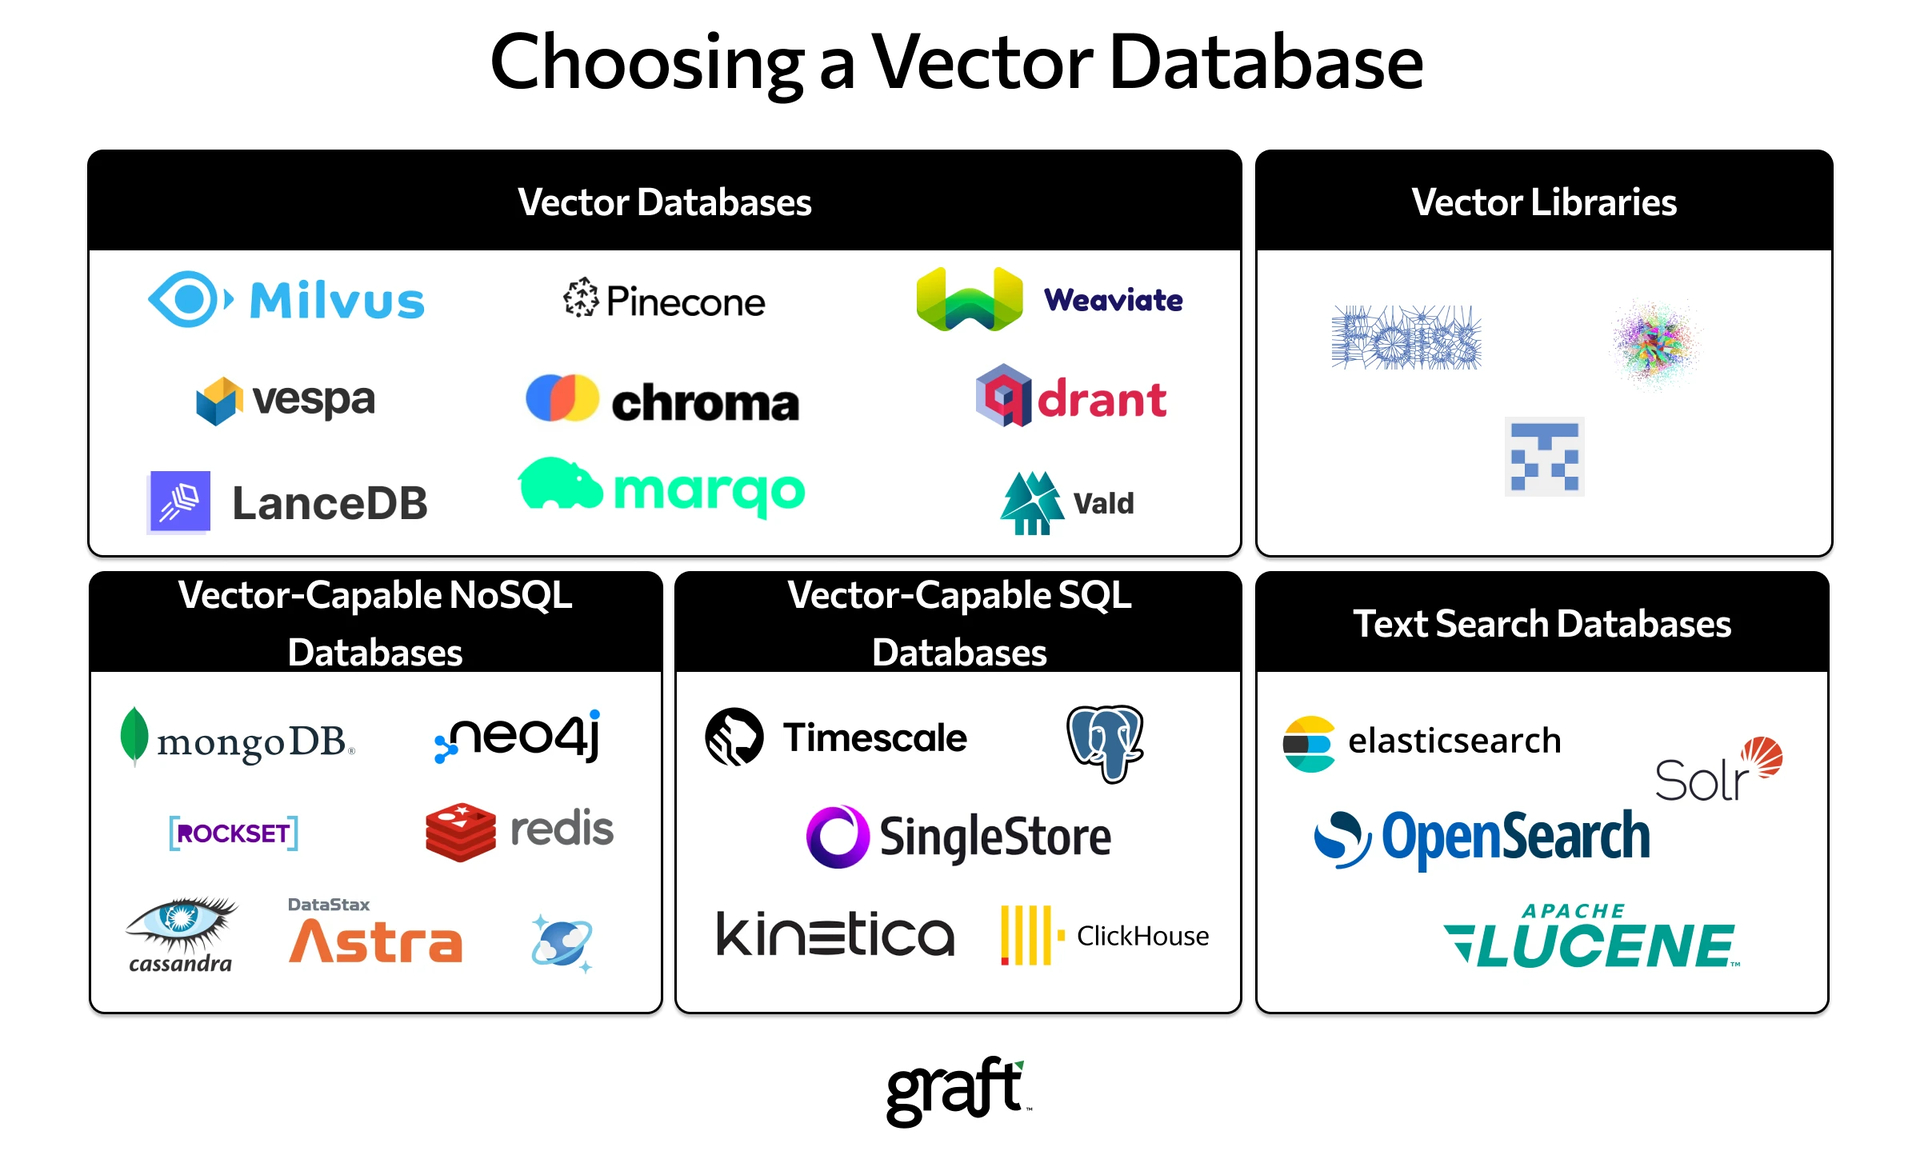 The top vector databases